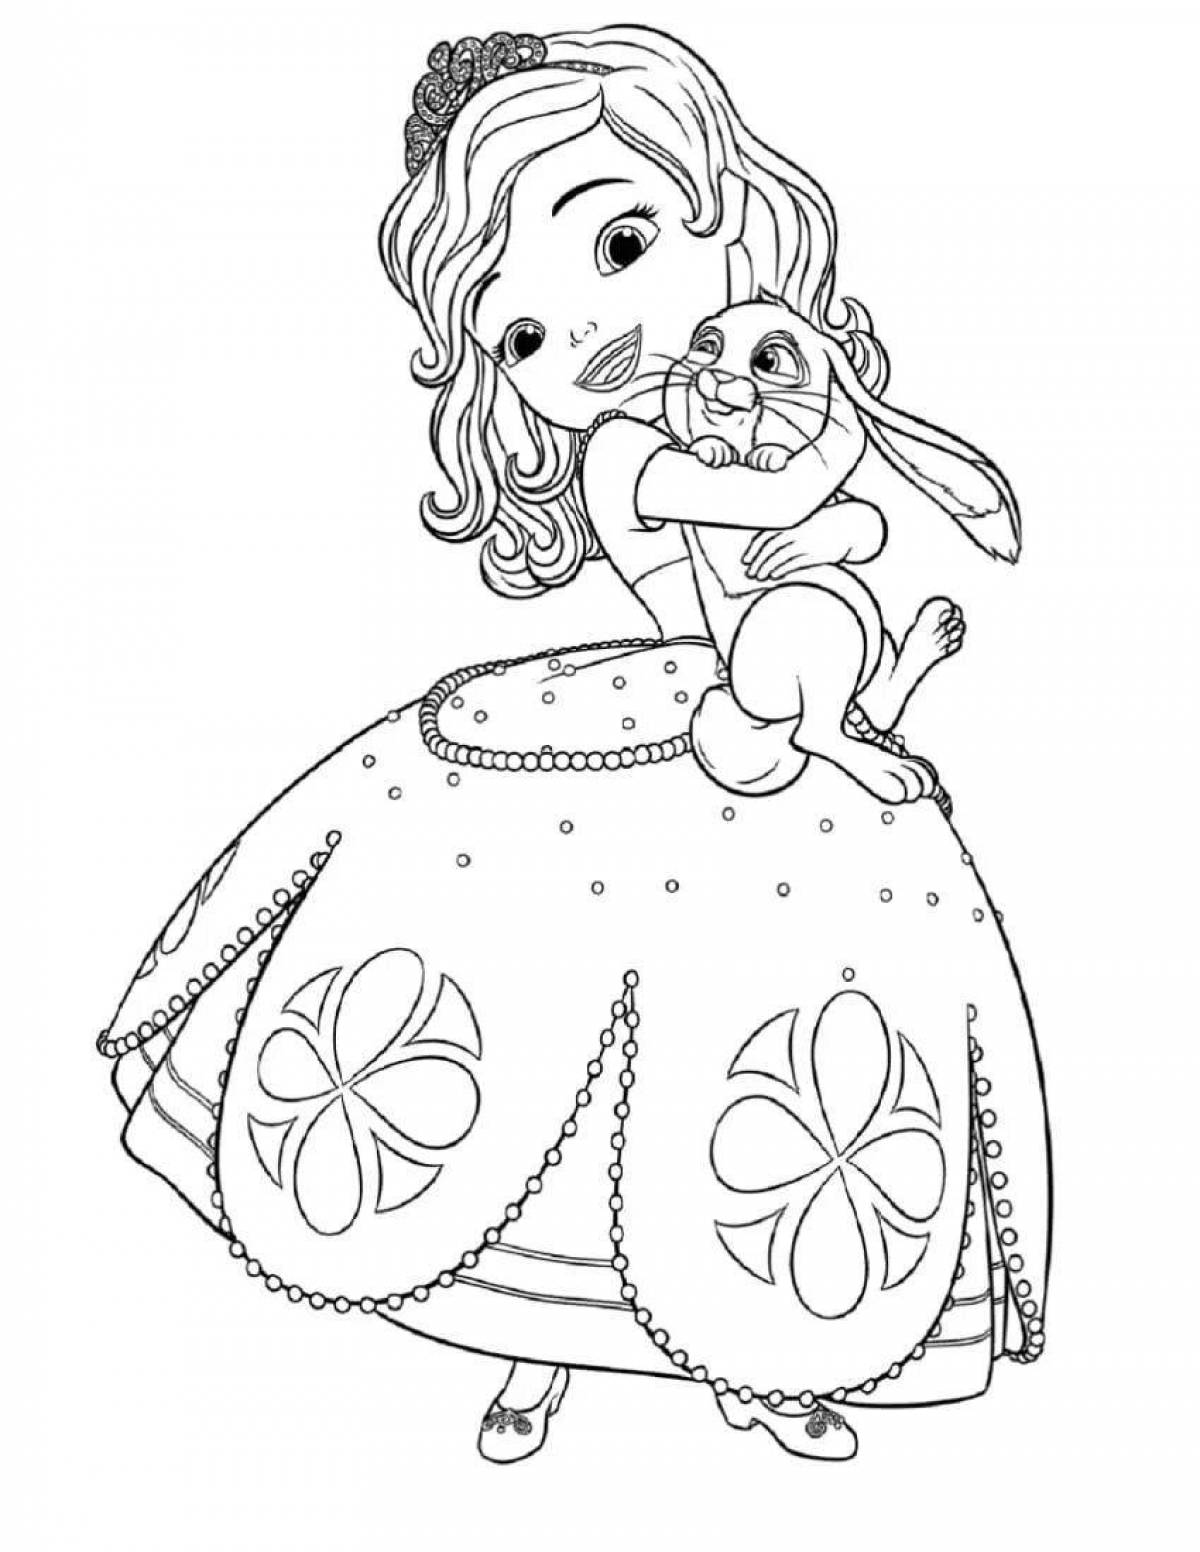 Fun coloring for girls princesses 5-6 years old